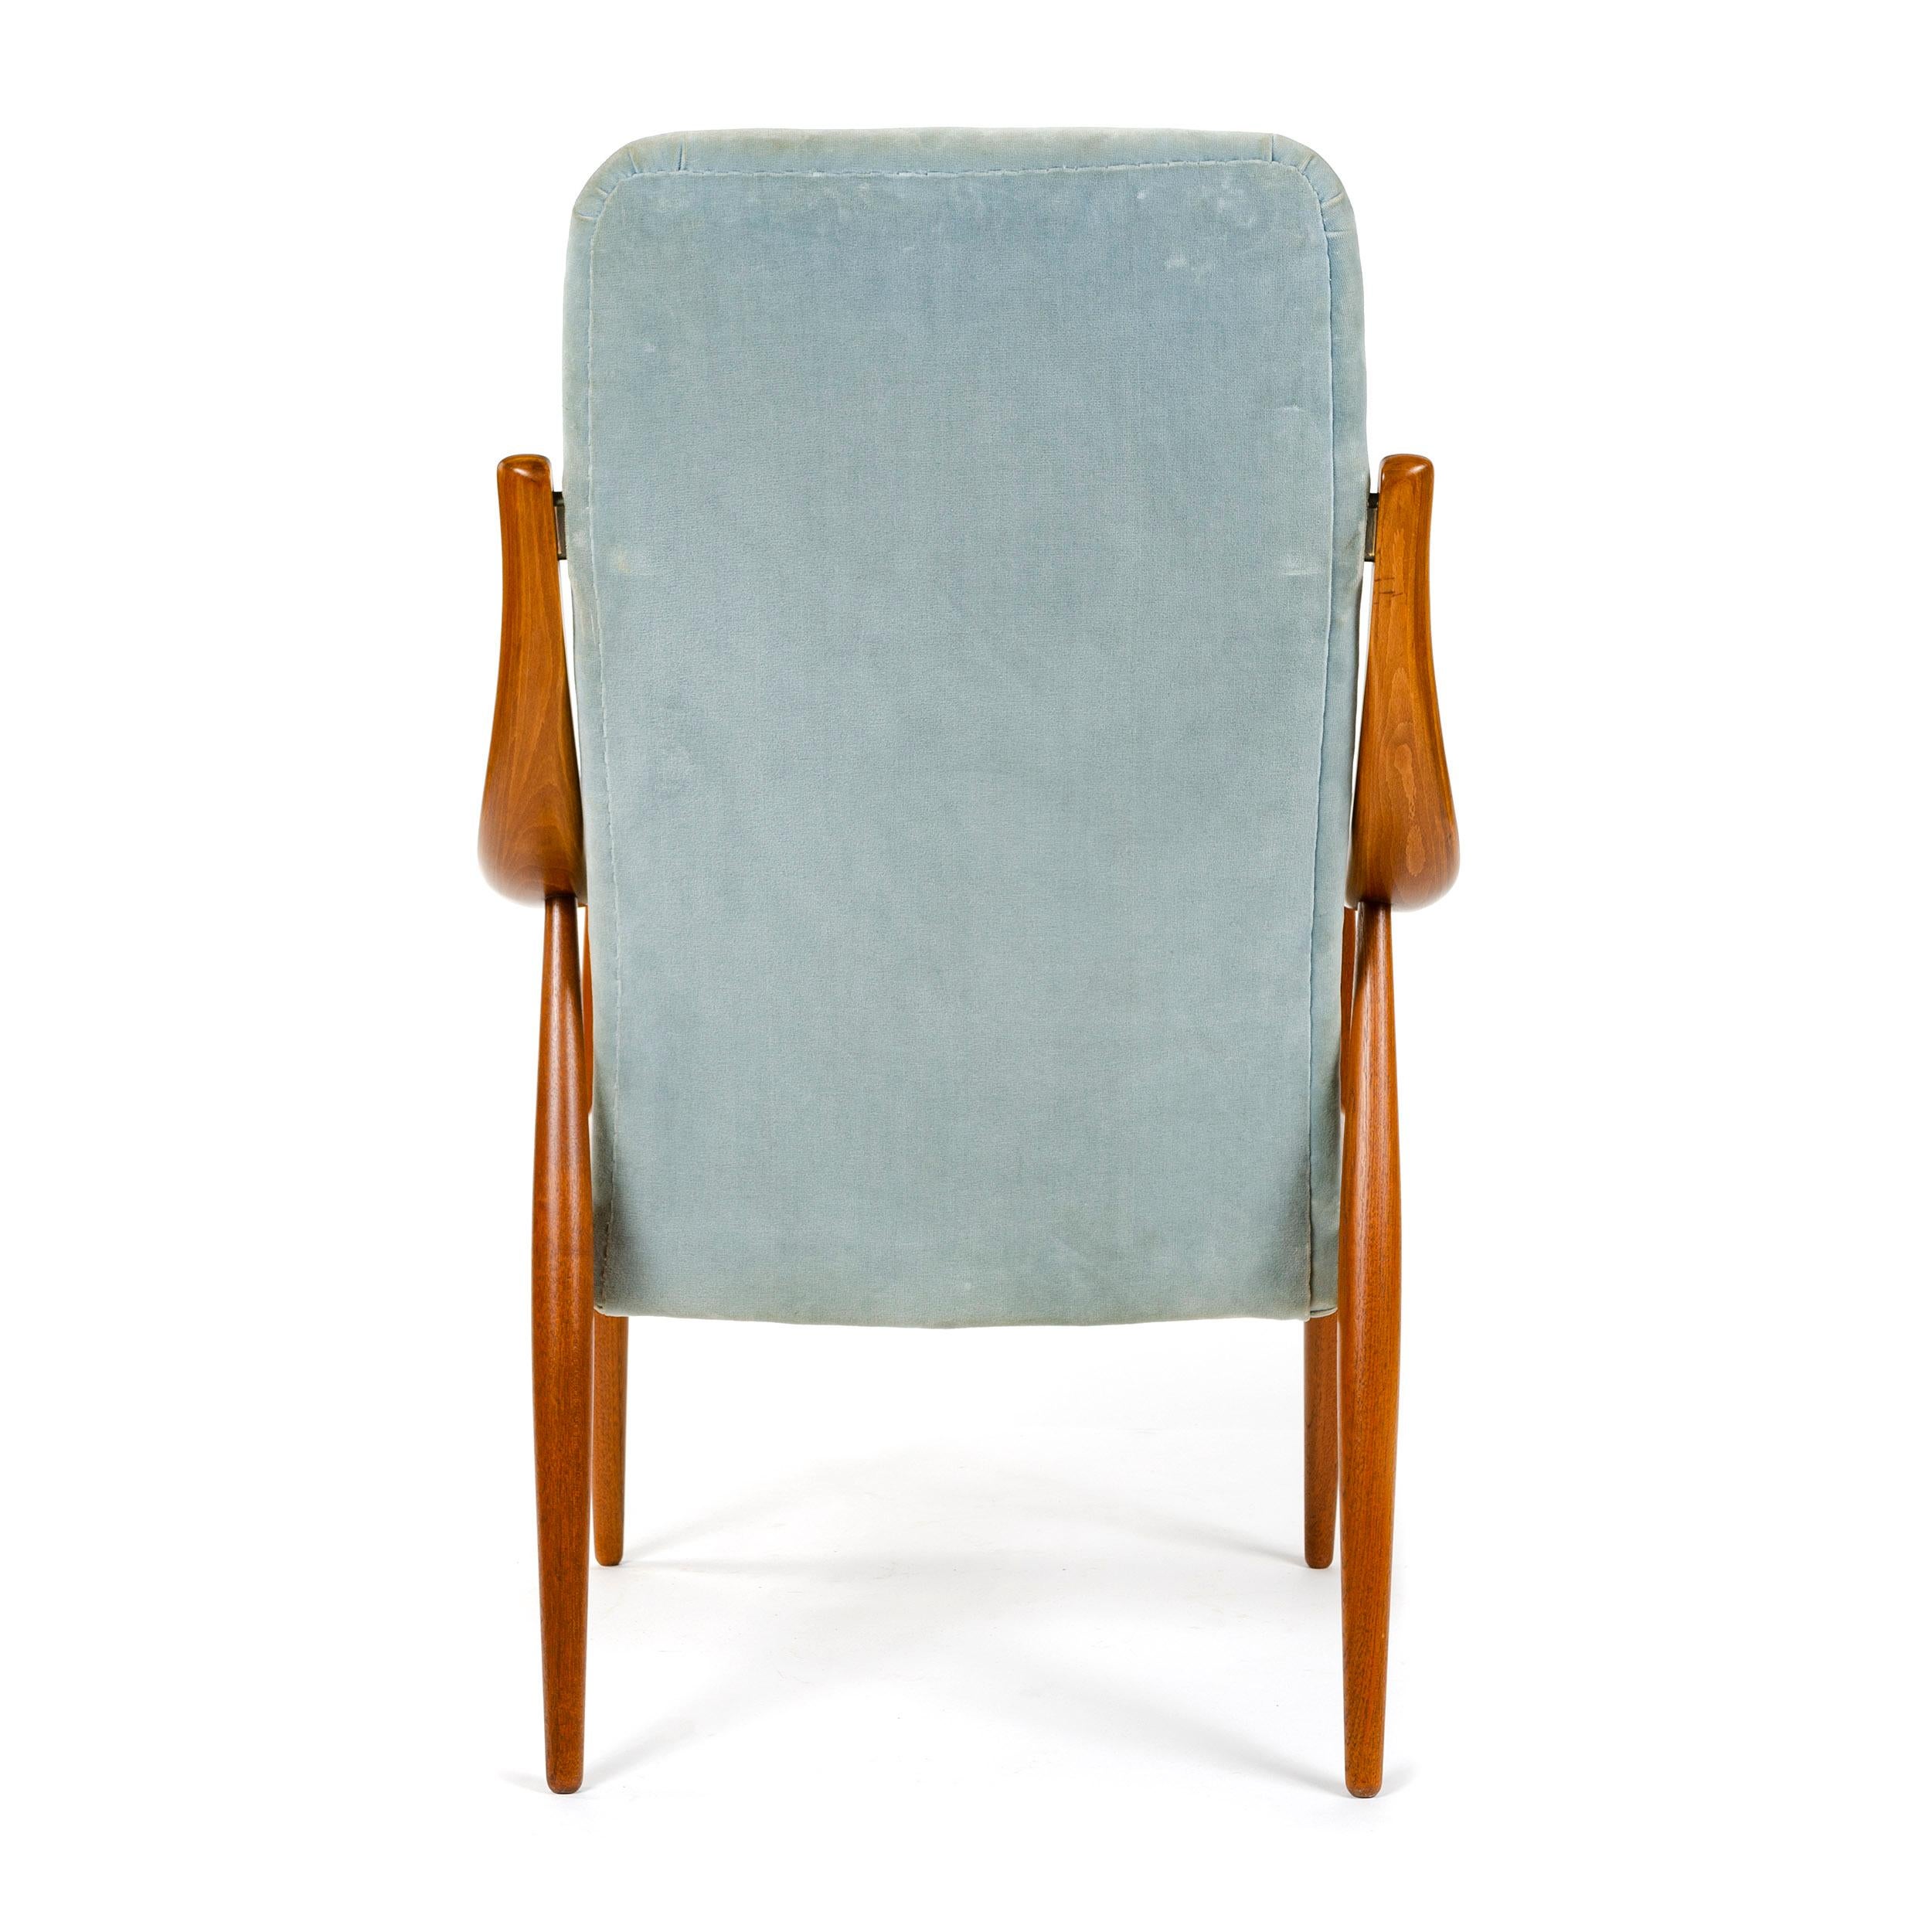 1950s Danish Upholstered High Back Armchair by Hvidt & Mölgaard-Nielsen In Good Condition For Sale In Sagaponack, NY